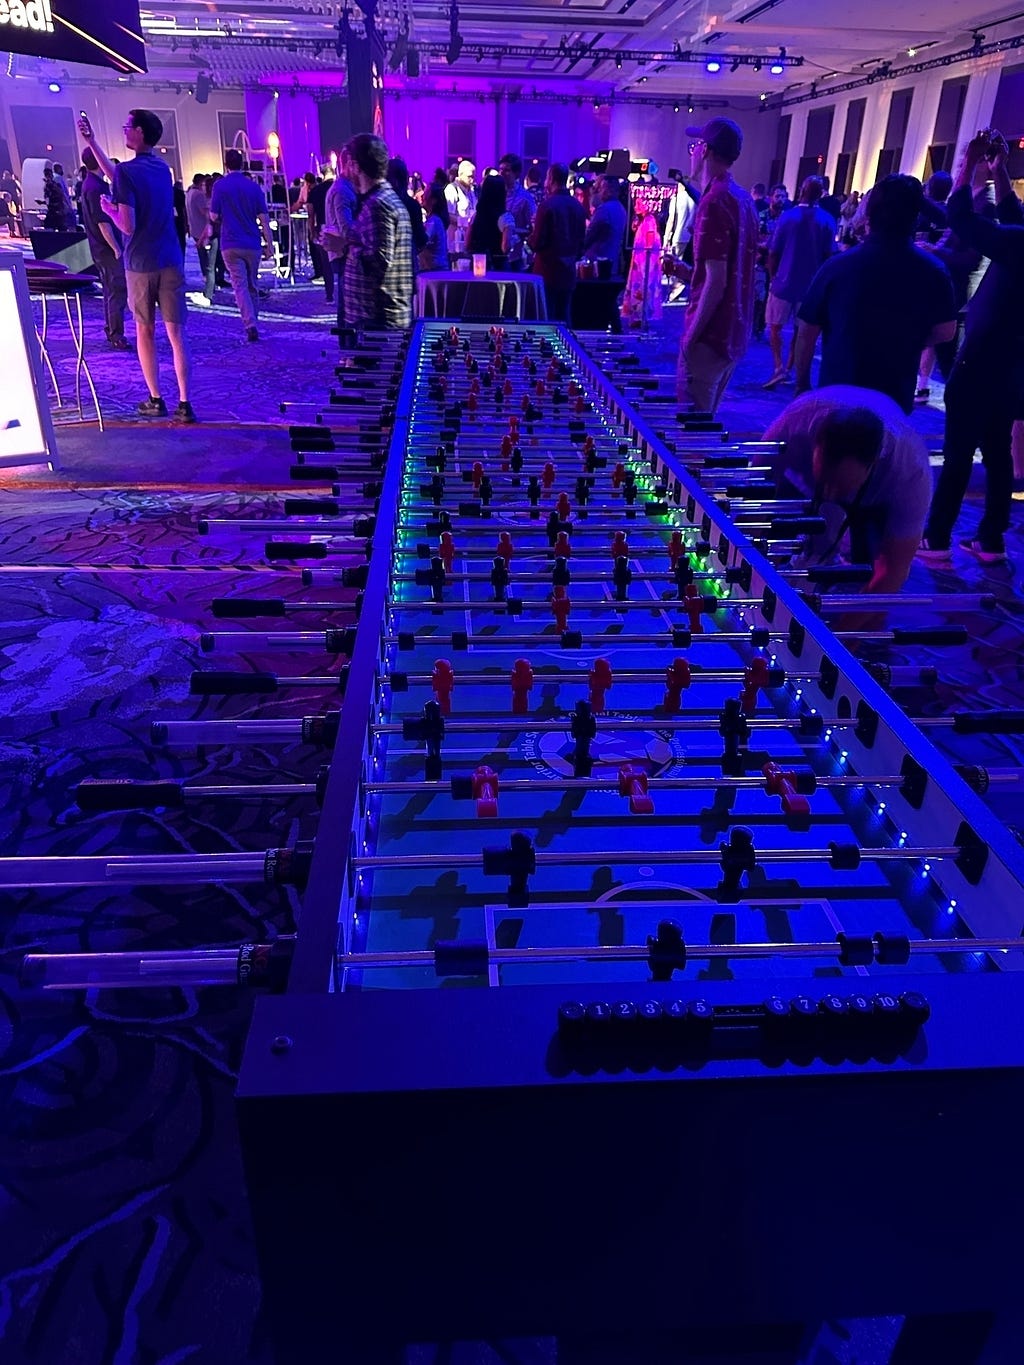 A large room is filled with people socializing and playing a long, multi-player foosball table under vibrant purple and blue lighting.